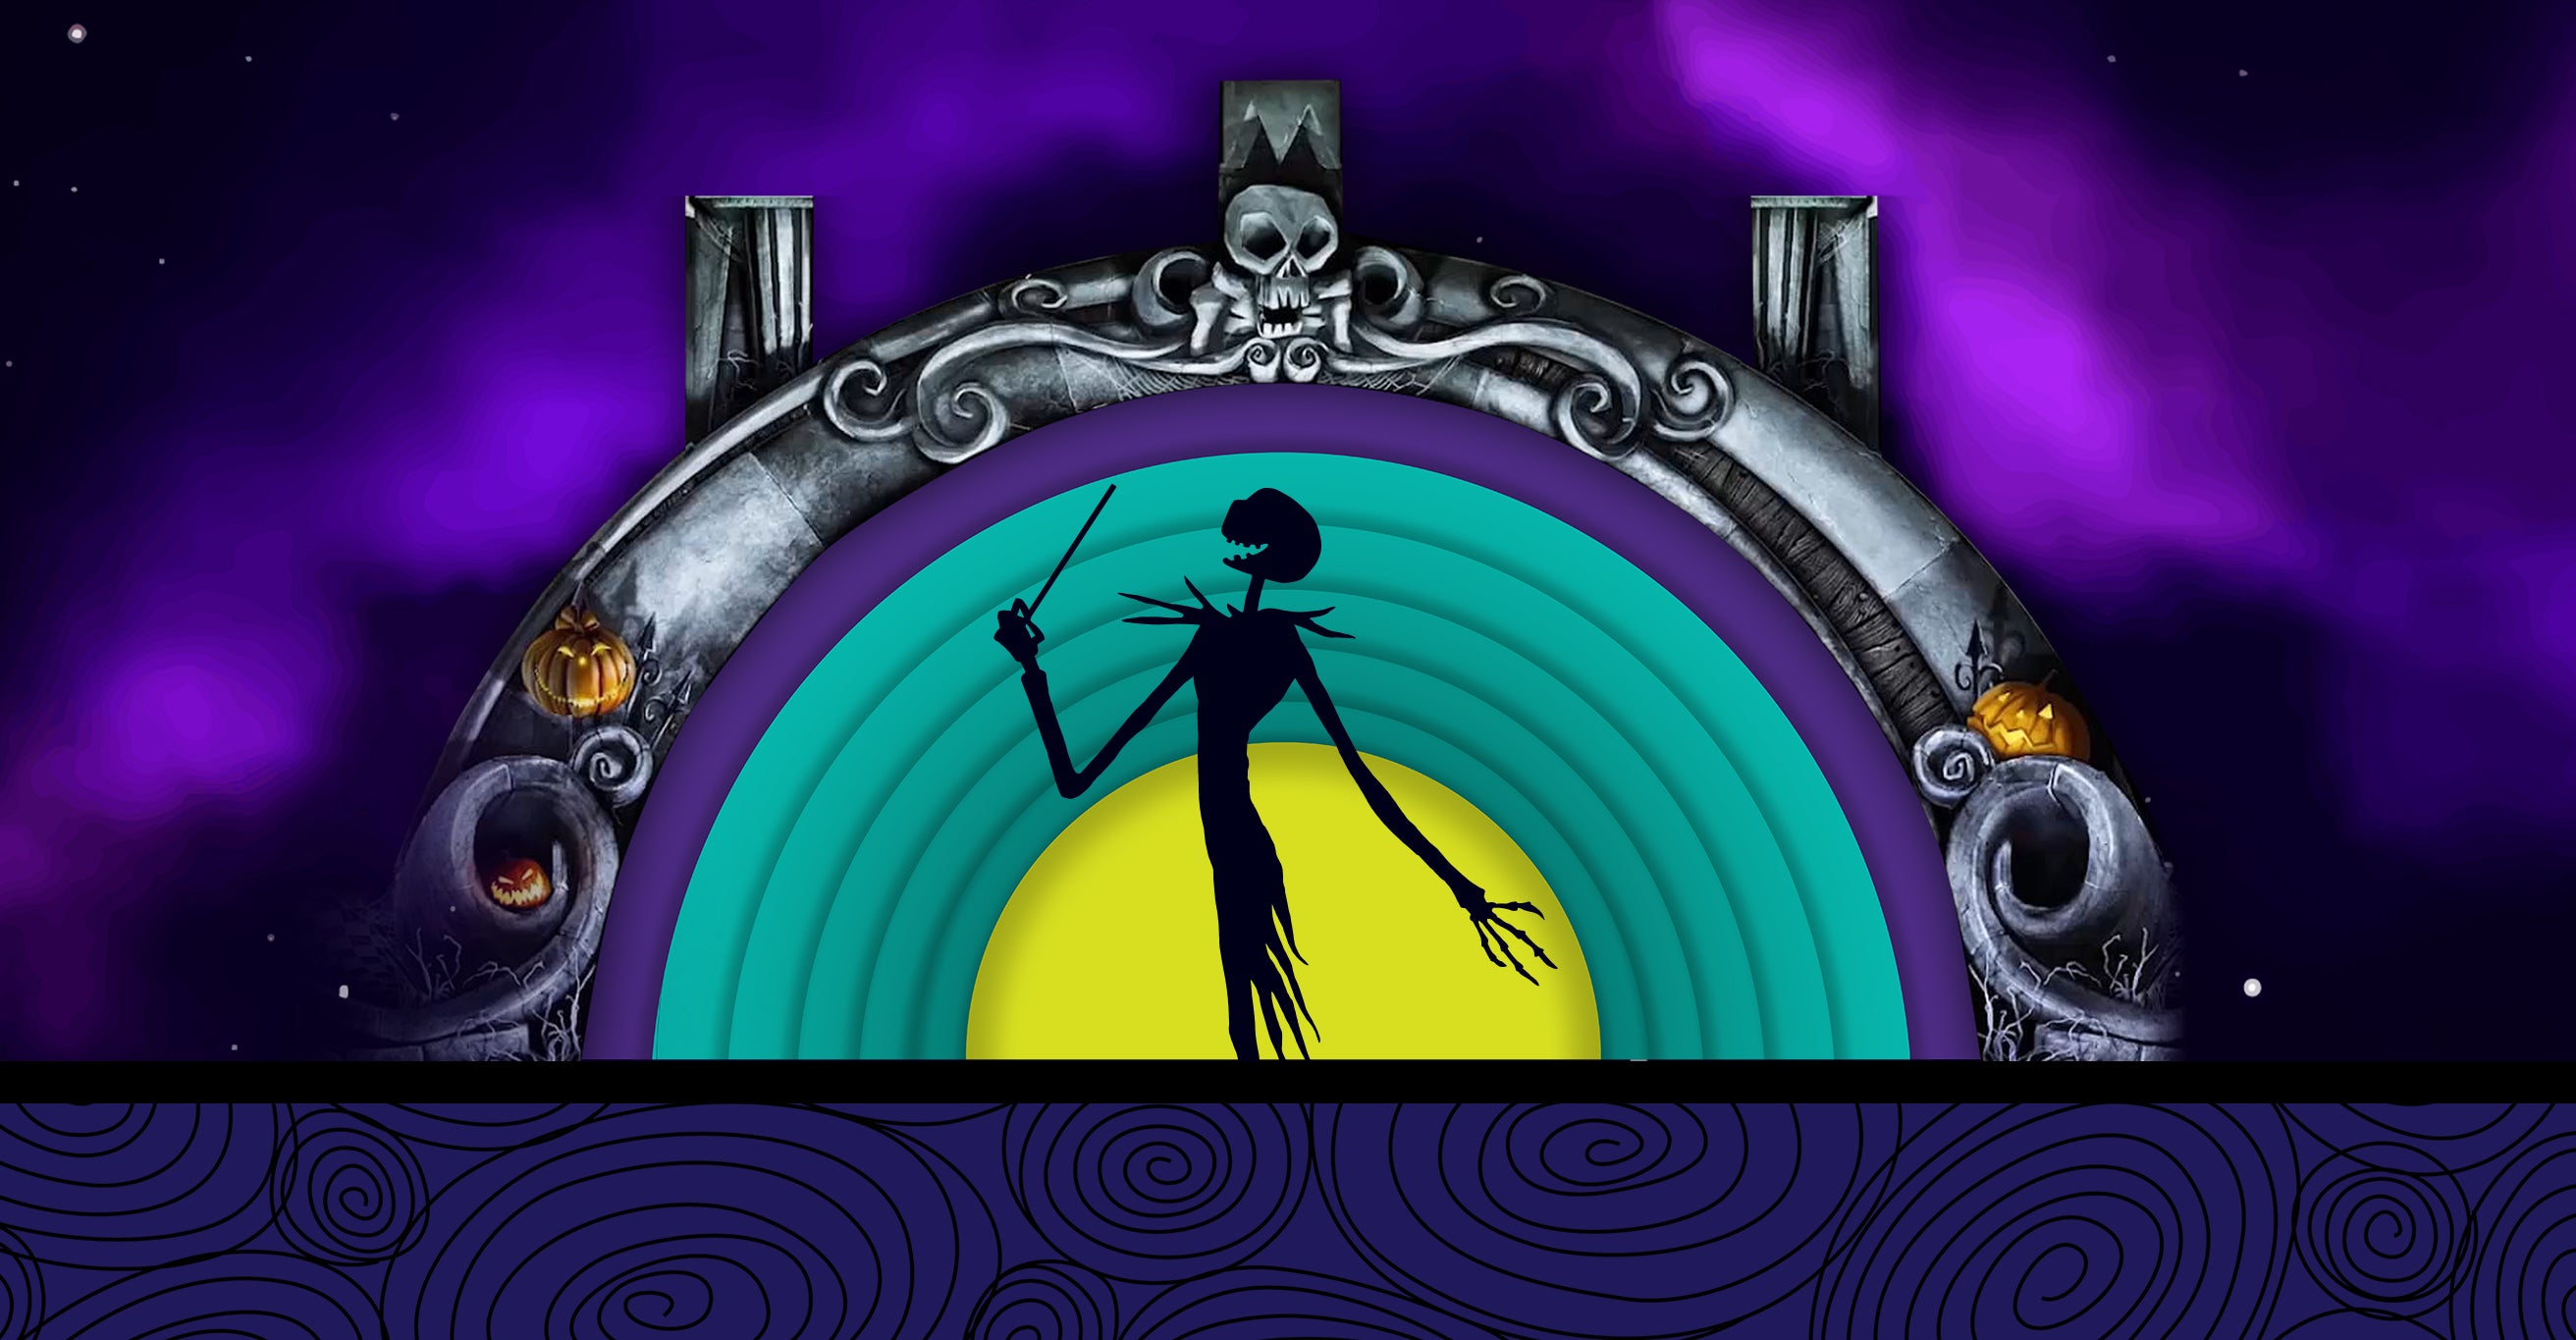 Disney Tim Burton's The Nightmare Before Christmas In Concert presale password for legit tickets in Hollywood